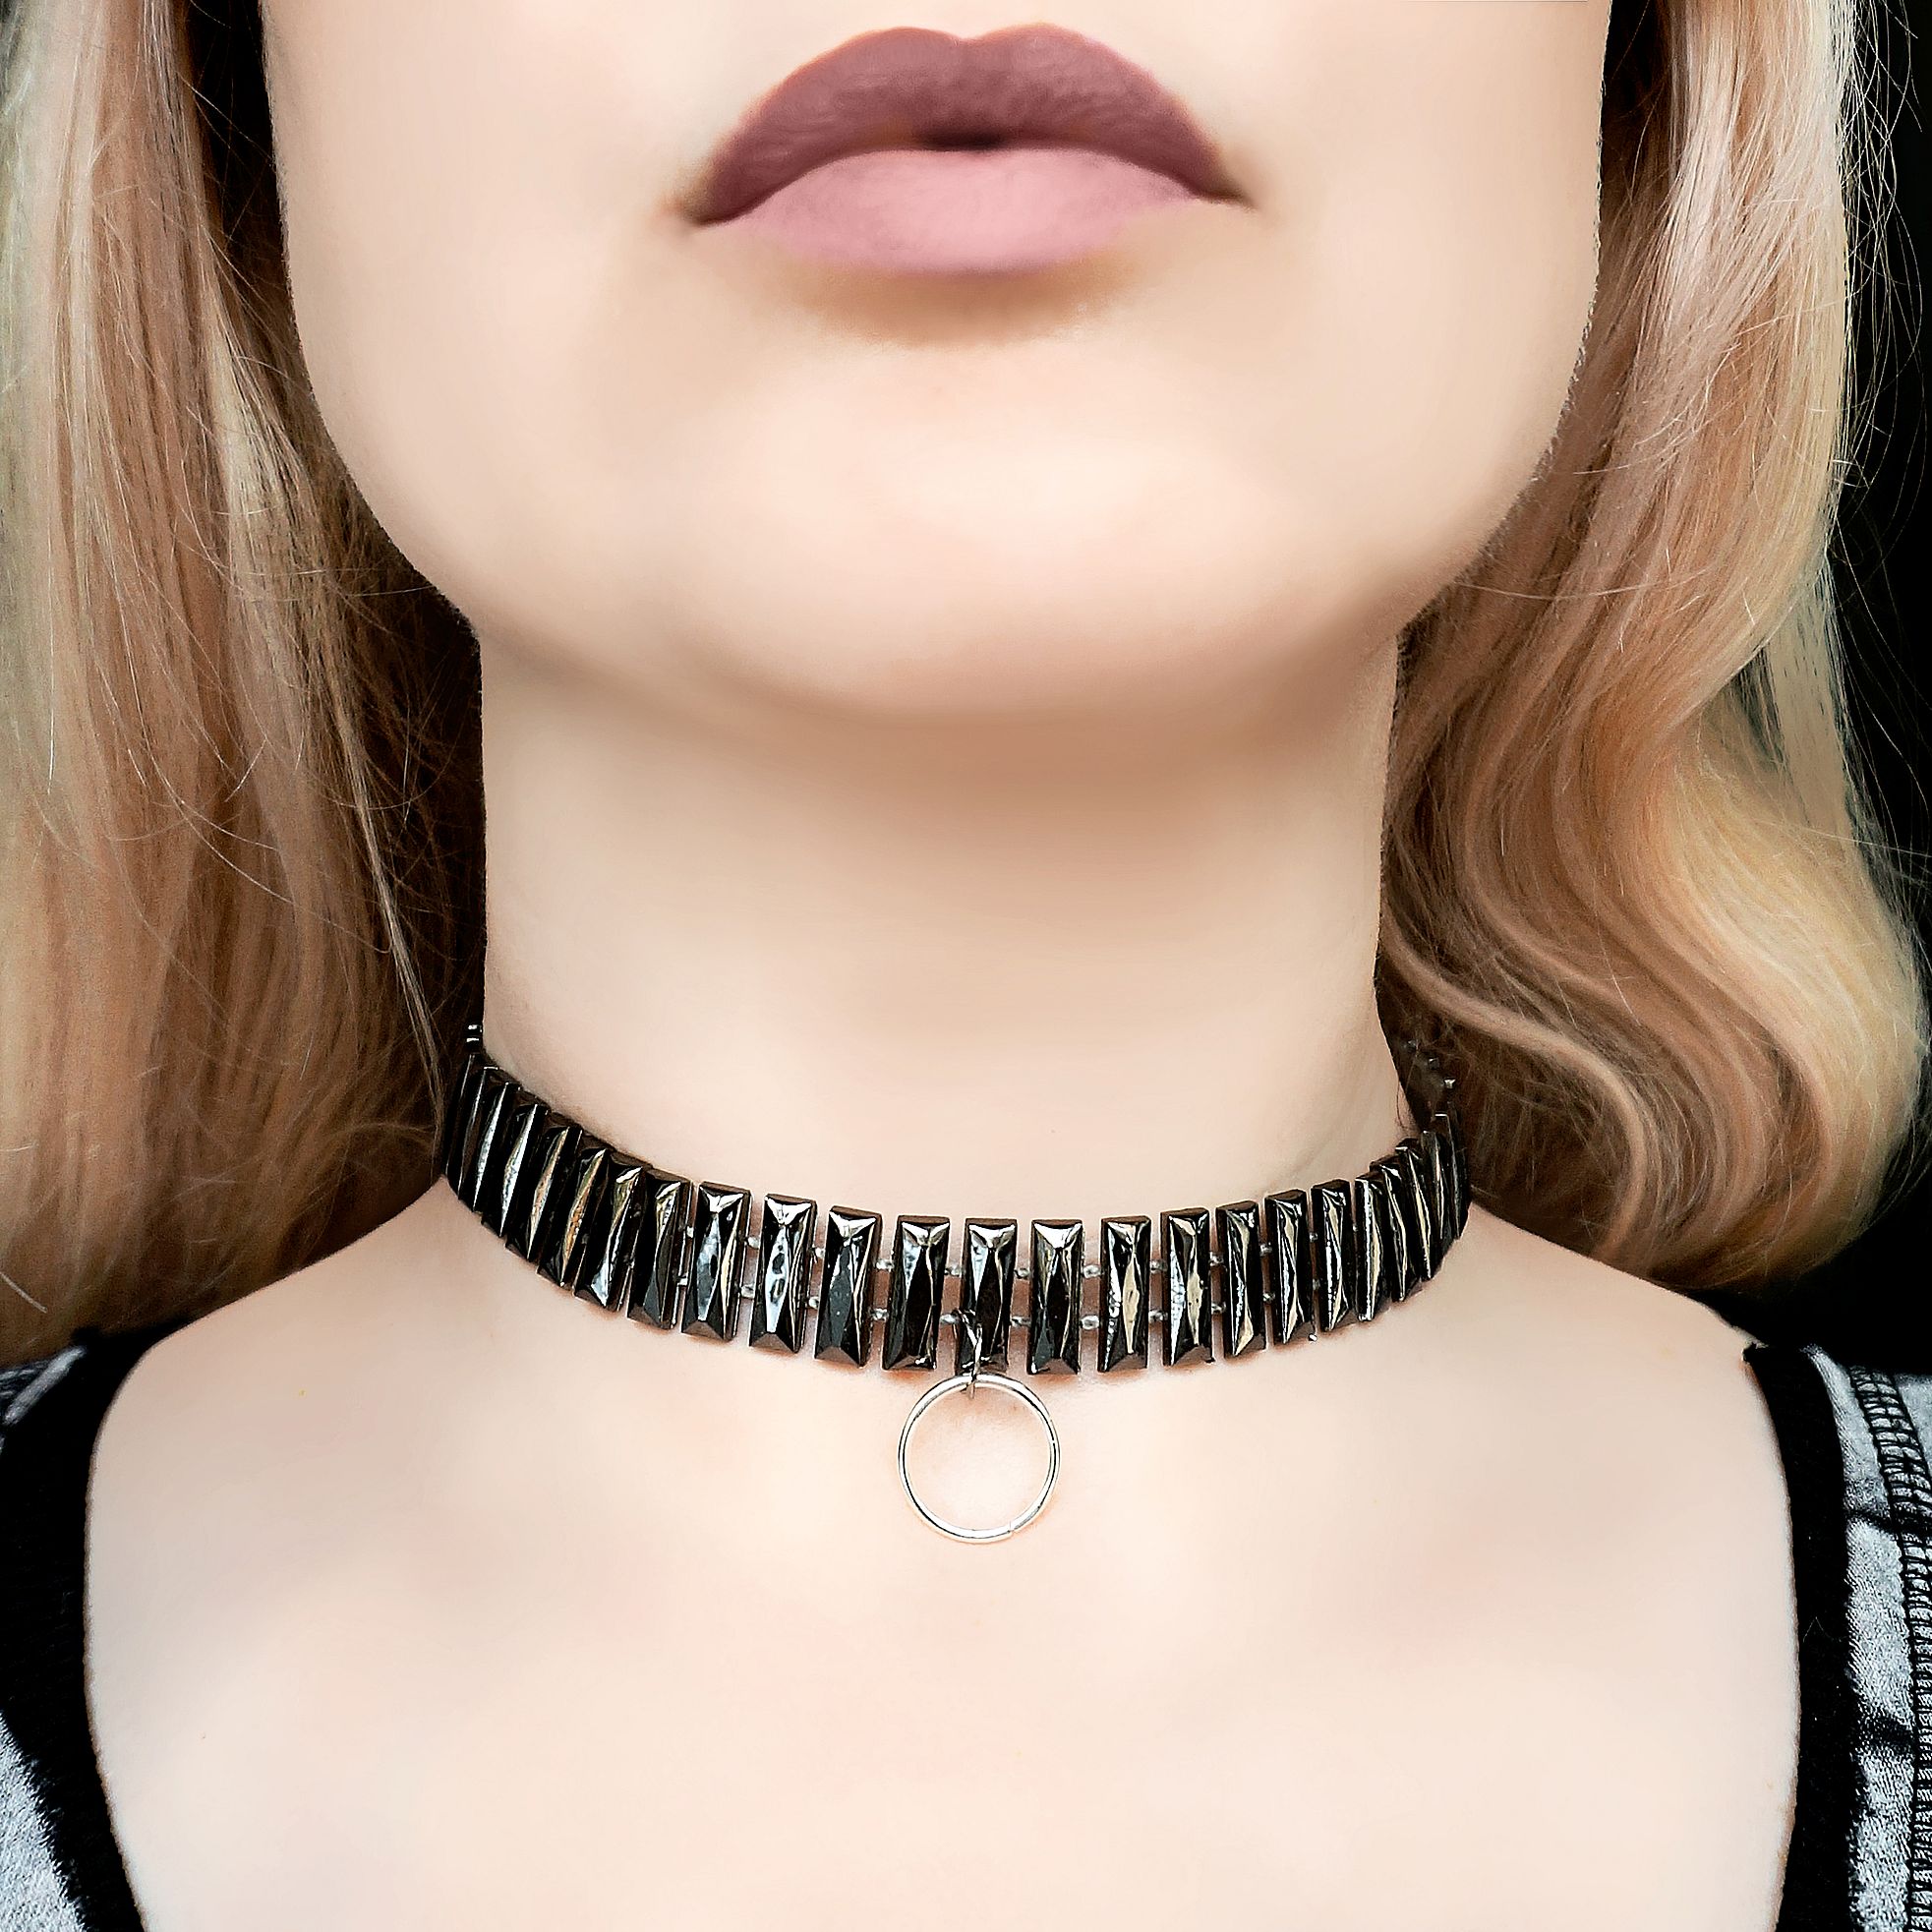 Submissive day collar Steampunk BDSM jewelry necklace.